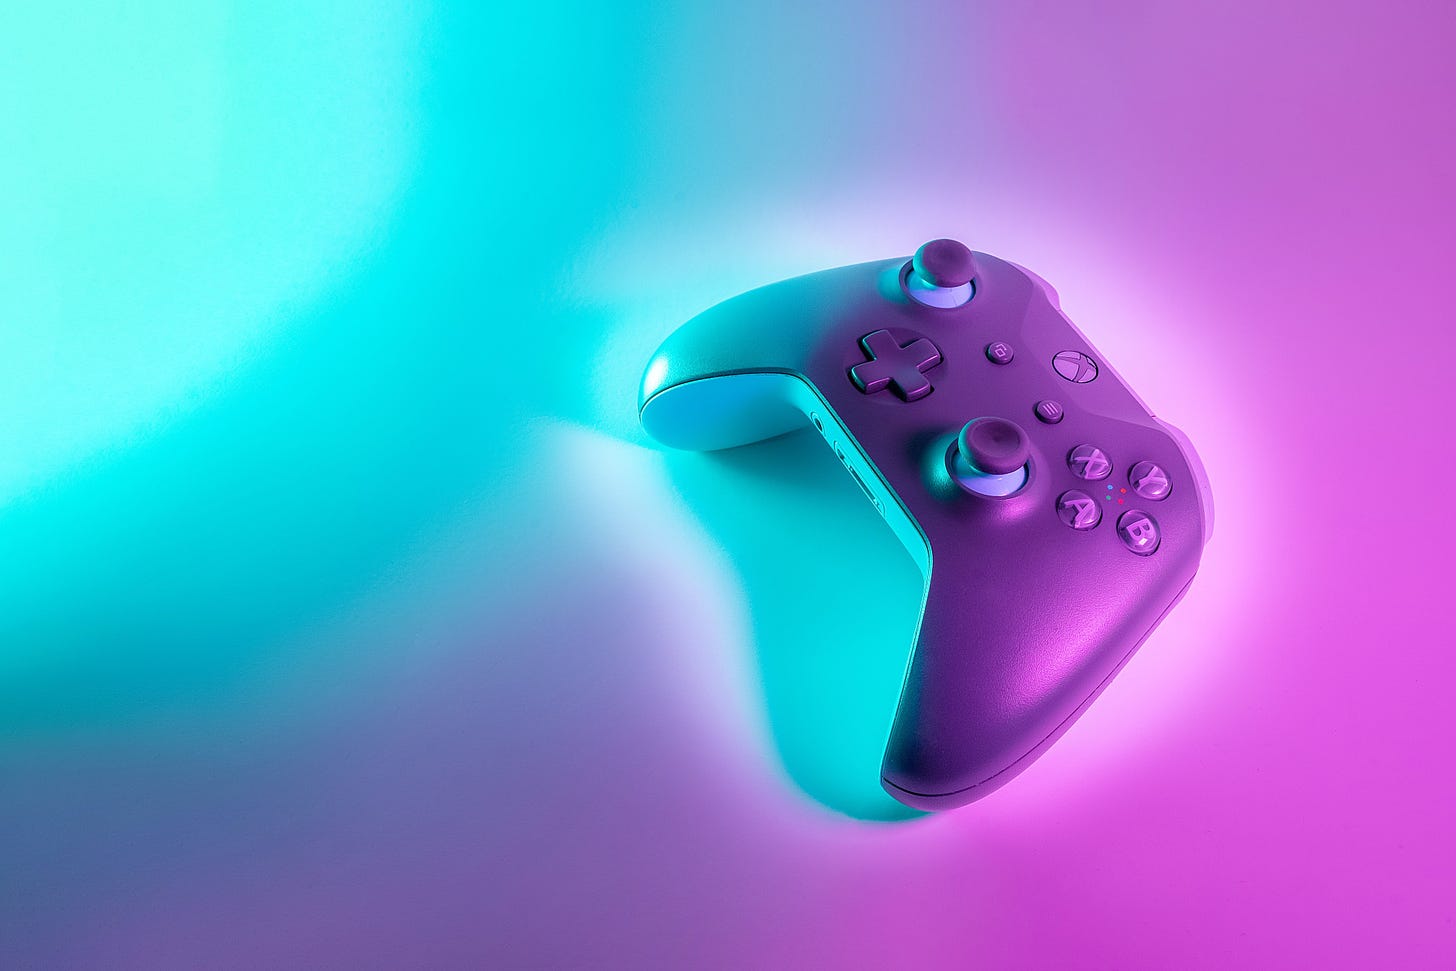 Xbox controller with blue and purple light shining on it